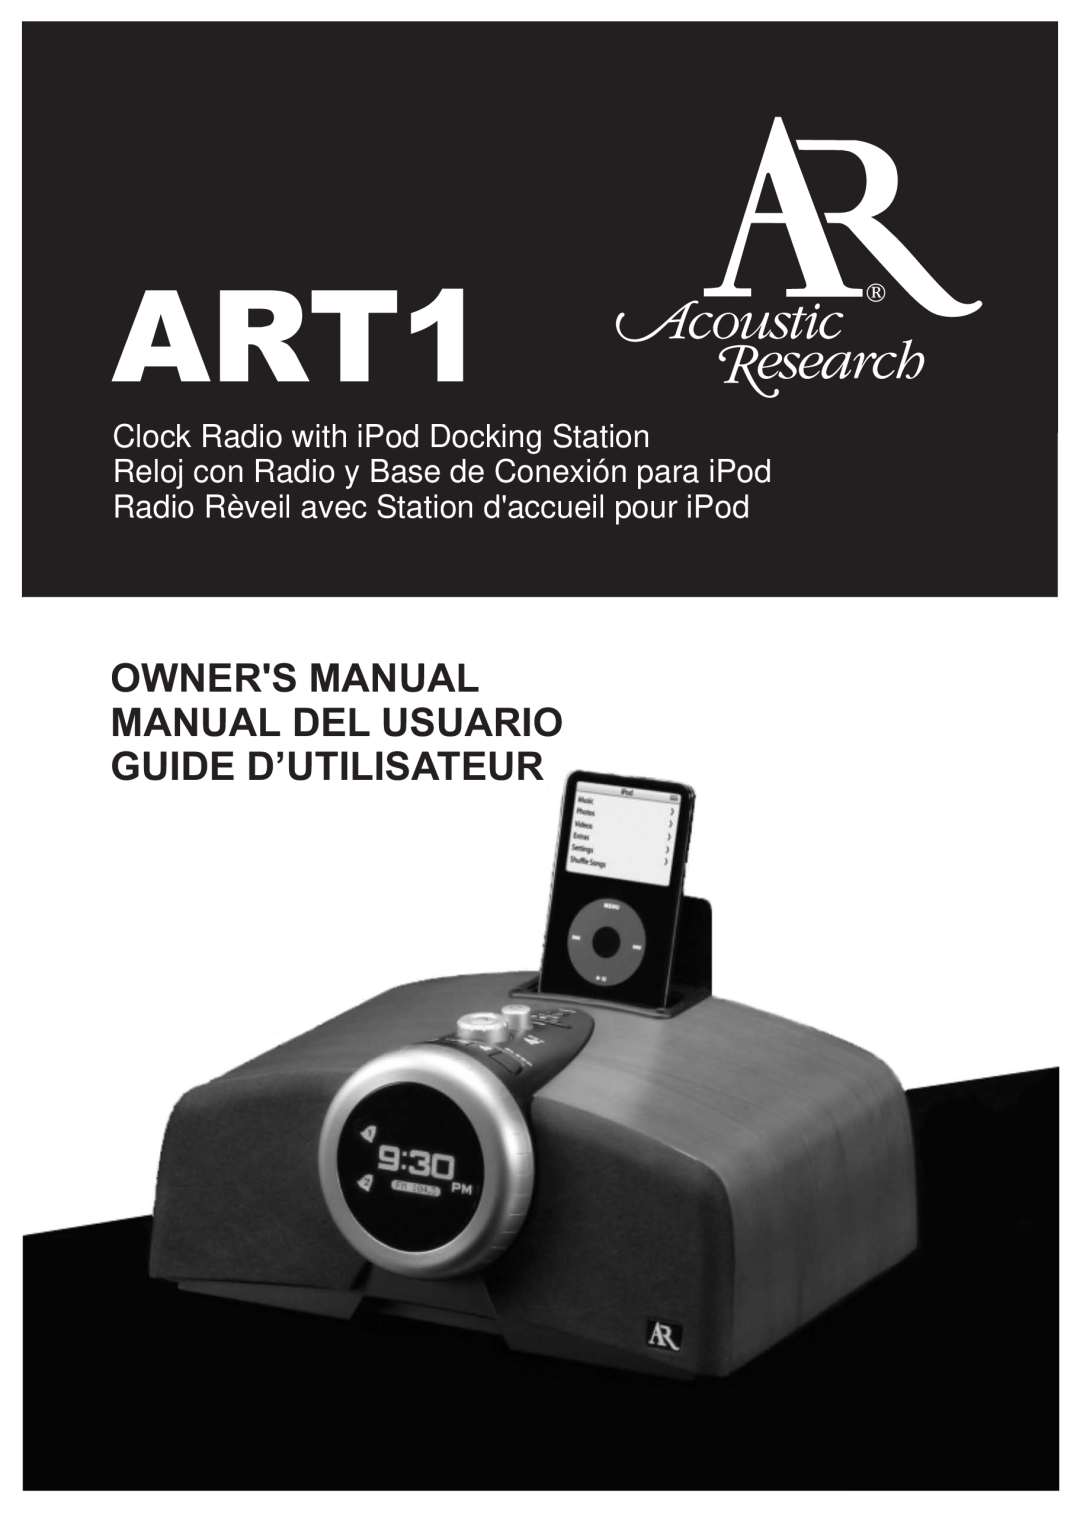 Acoustic Research ART1 owner manual Guide D’Utilisateur, Clock Radio with iPod Docking Station 